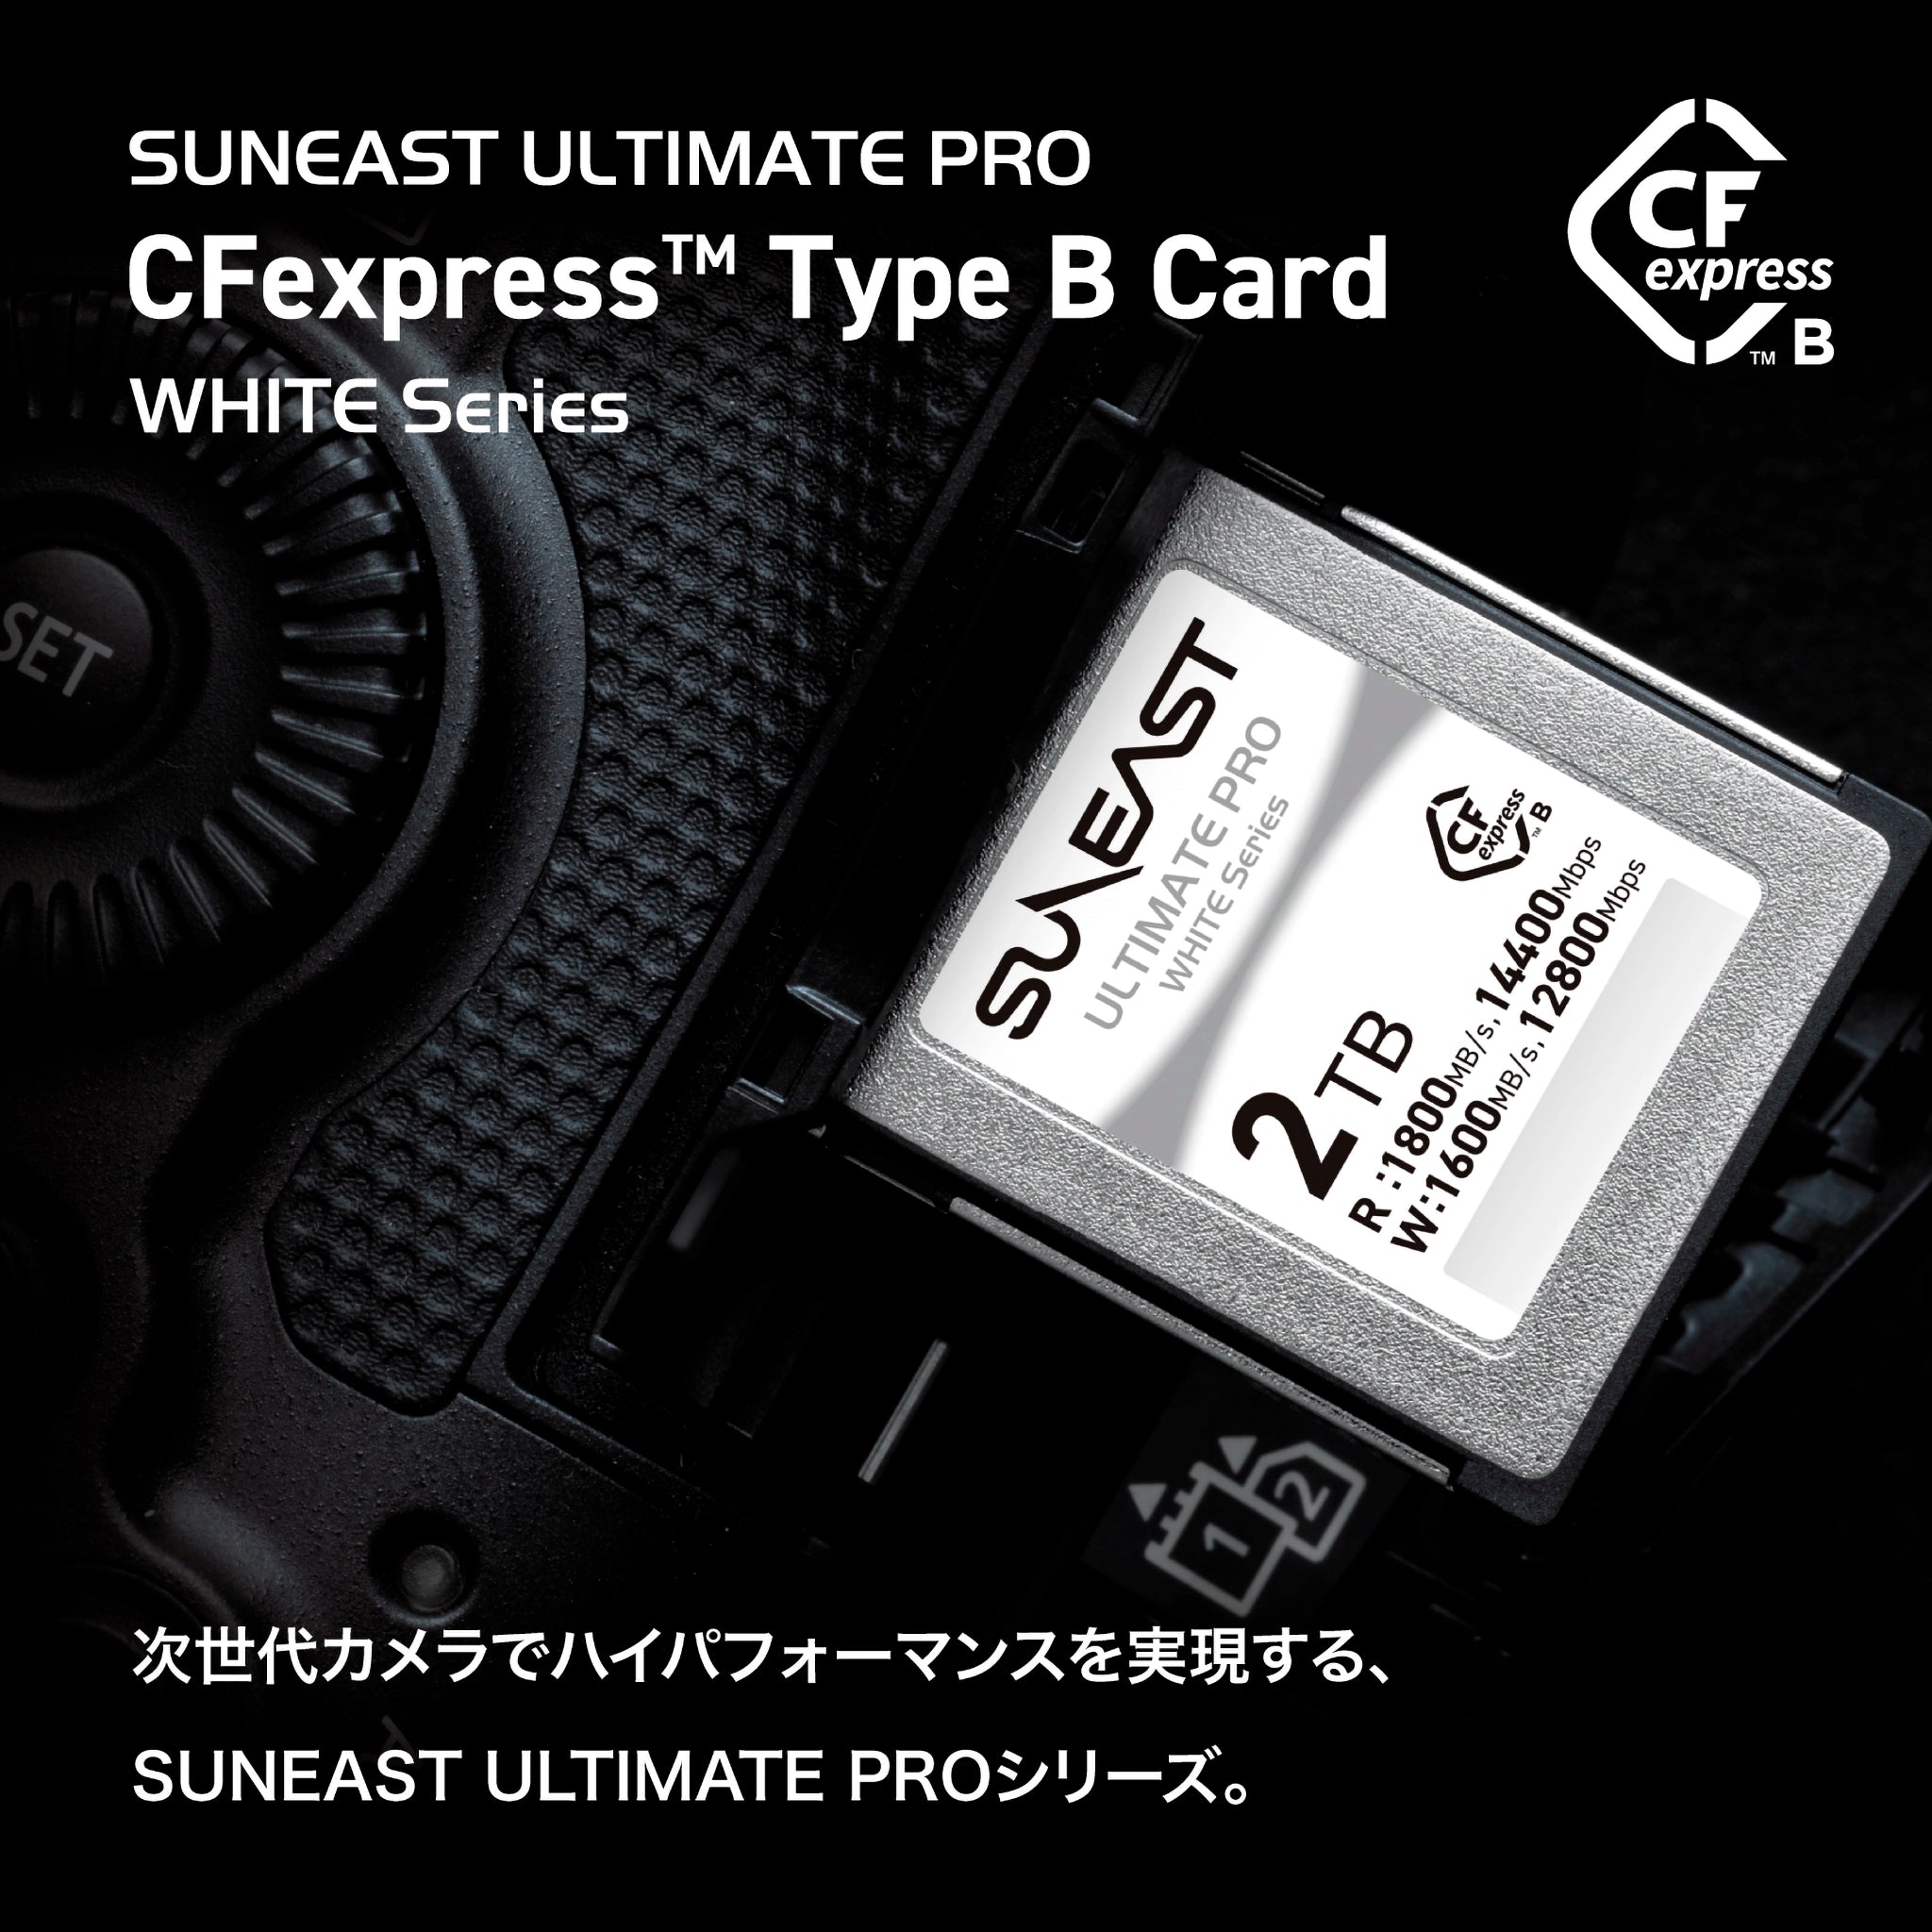 ULTIMATE PRO CFexpress Type B Card【WHITE Series】2TB - SUNEAST 